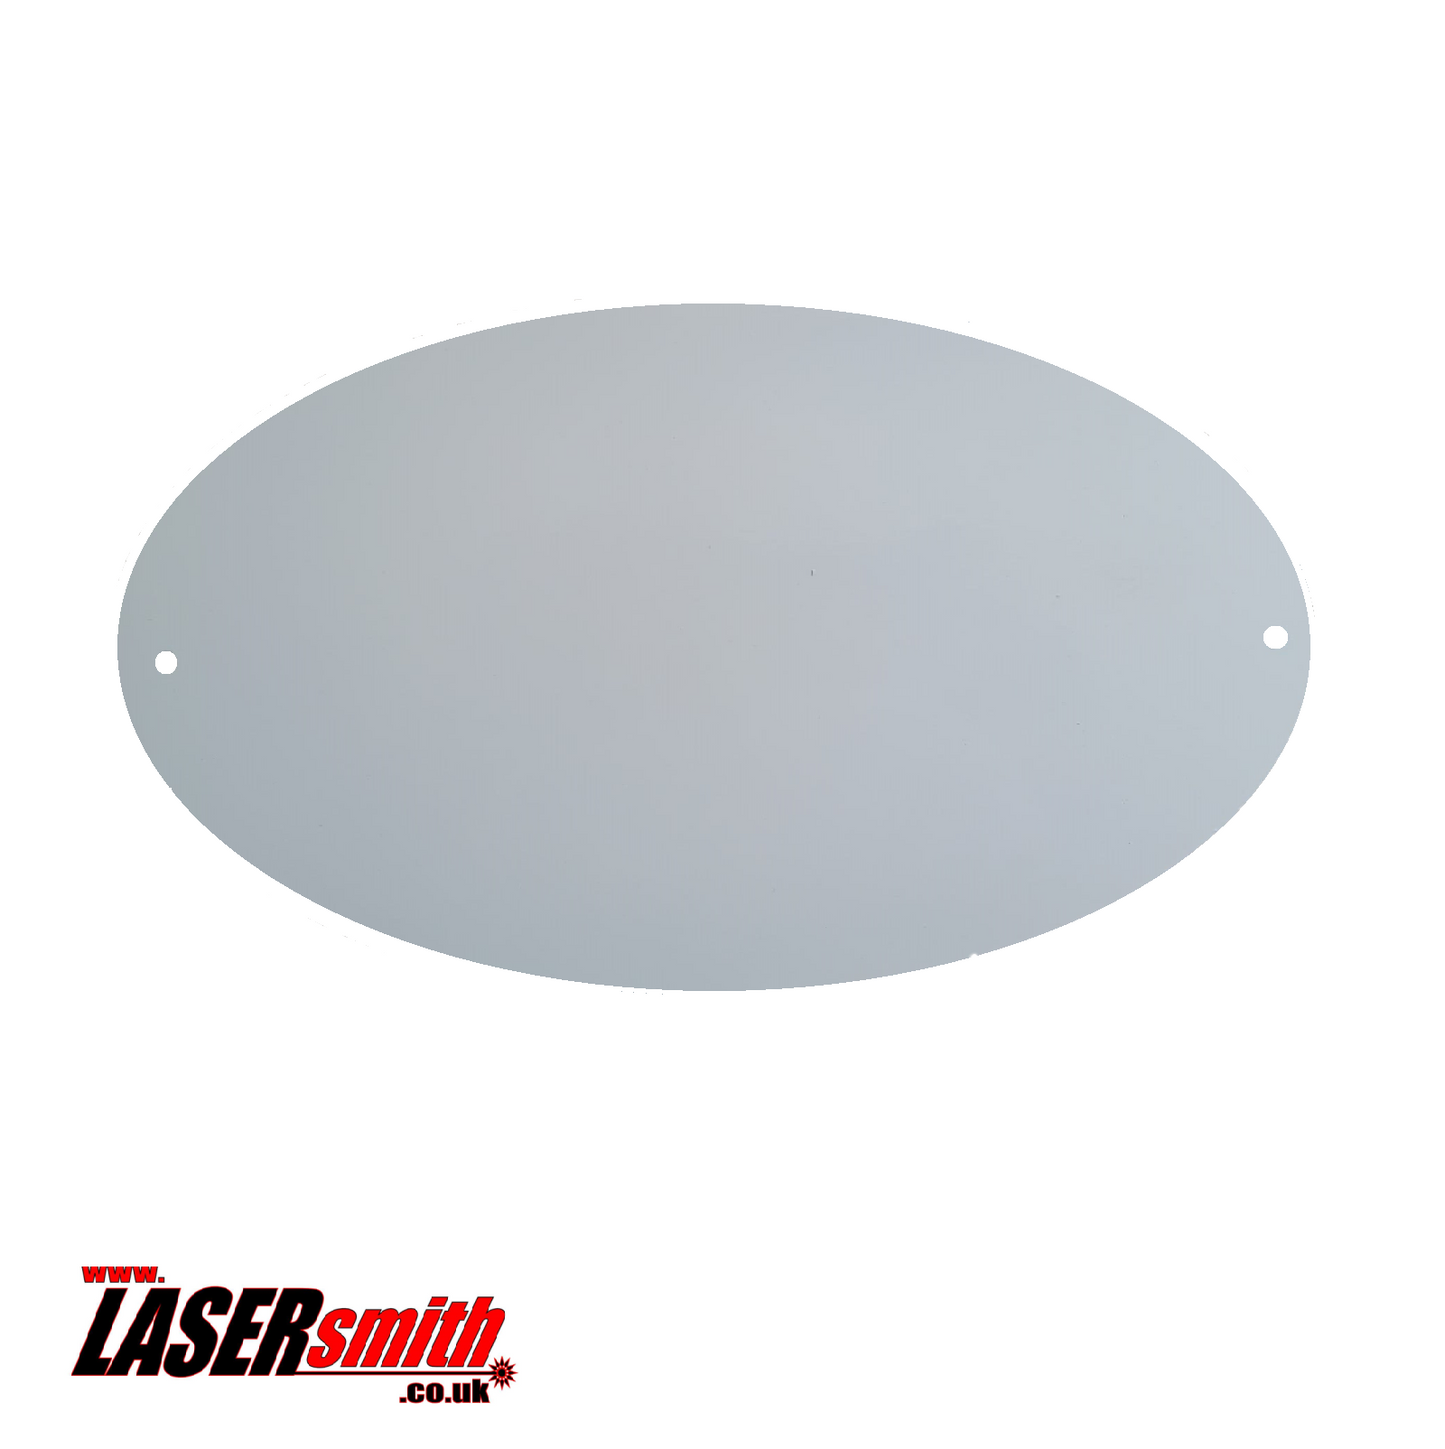 300x200mm Oval Plaque - End of Line